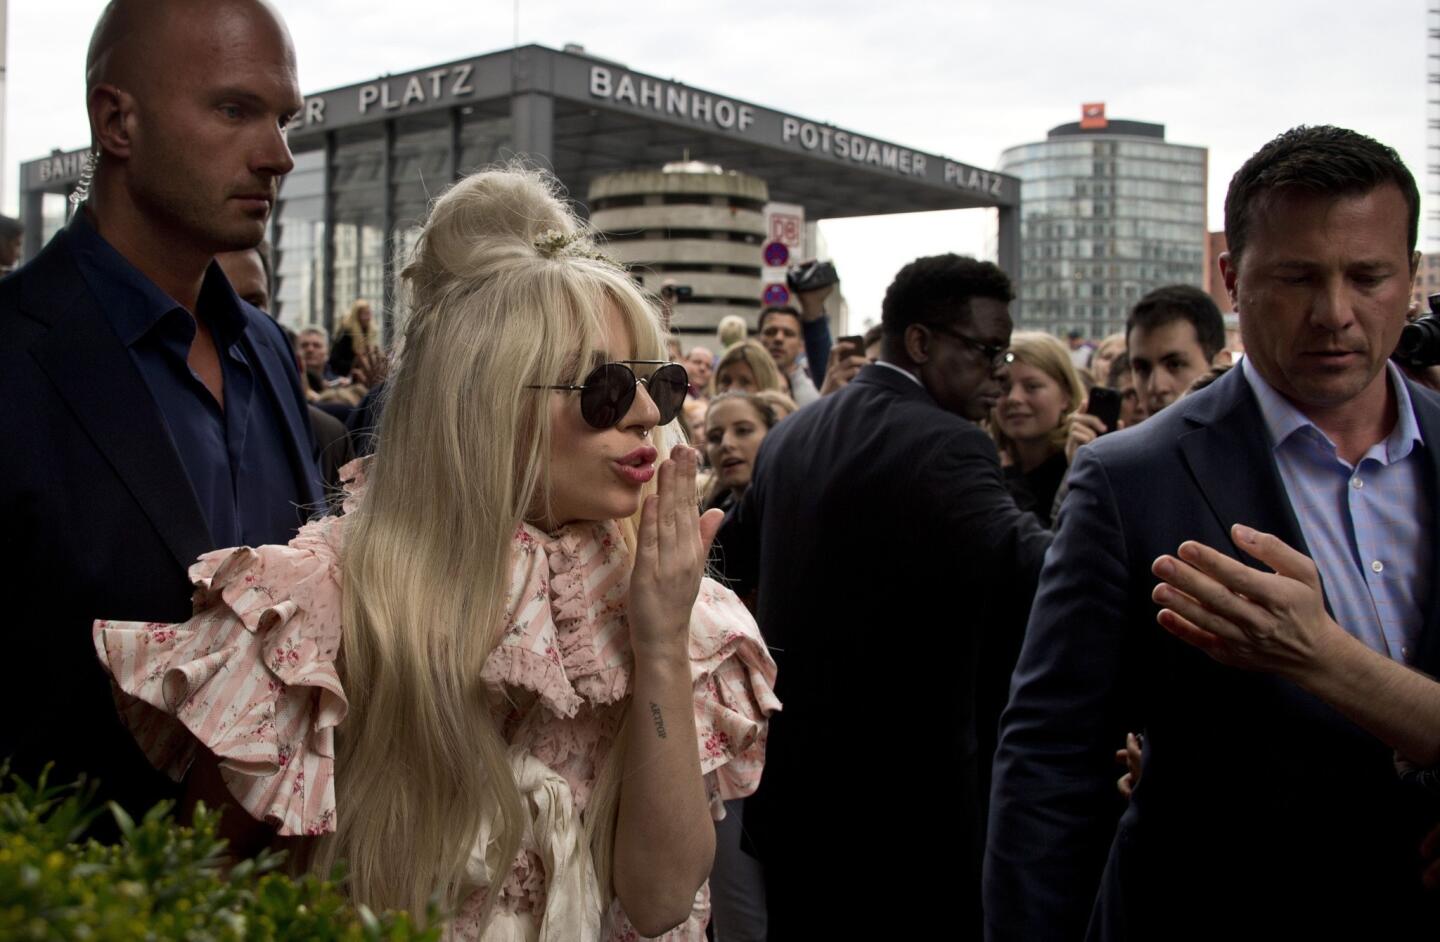 Lady Gaga storms Twitter to address haters